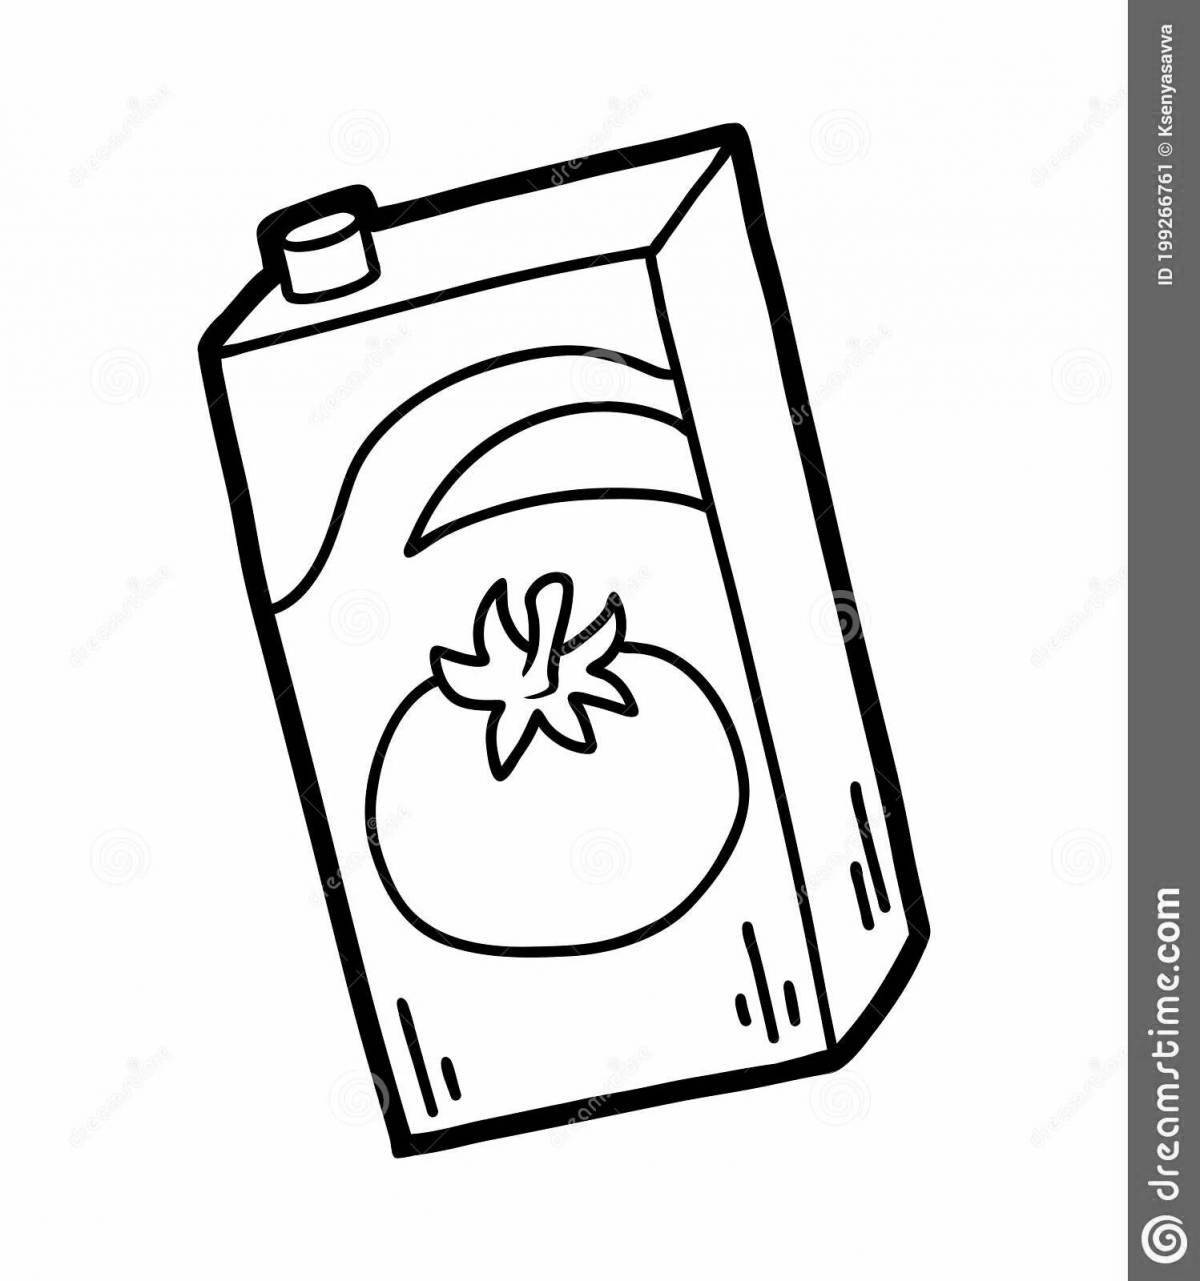 Adorable juice coloring page for kids